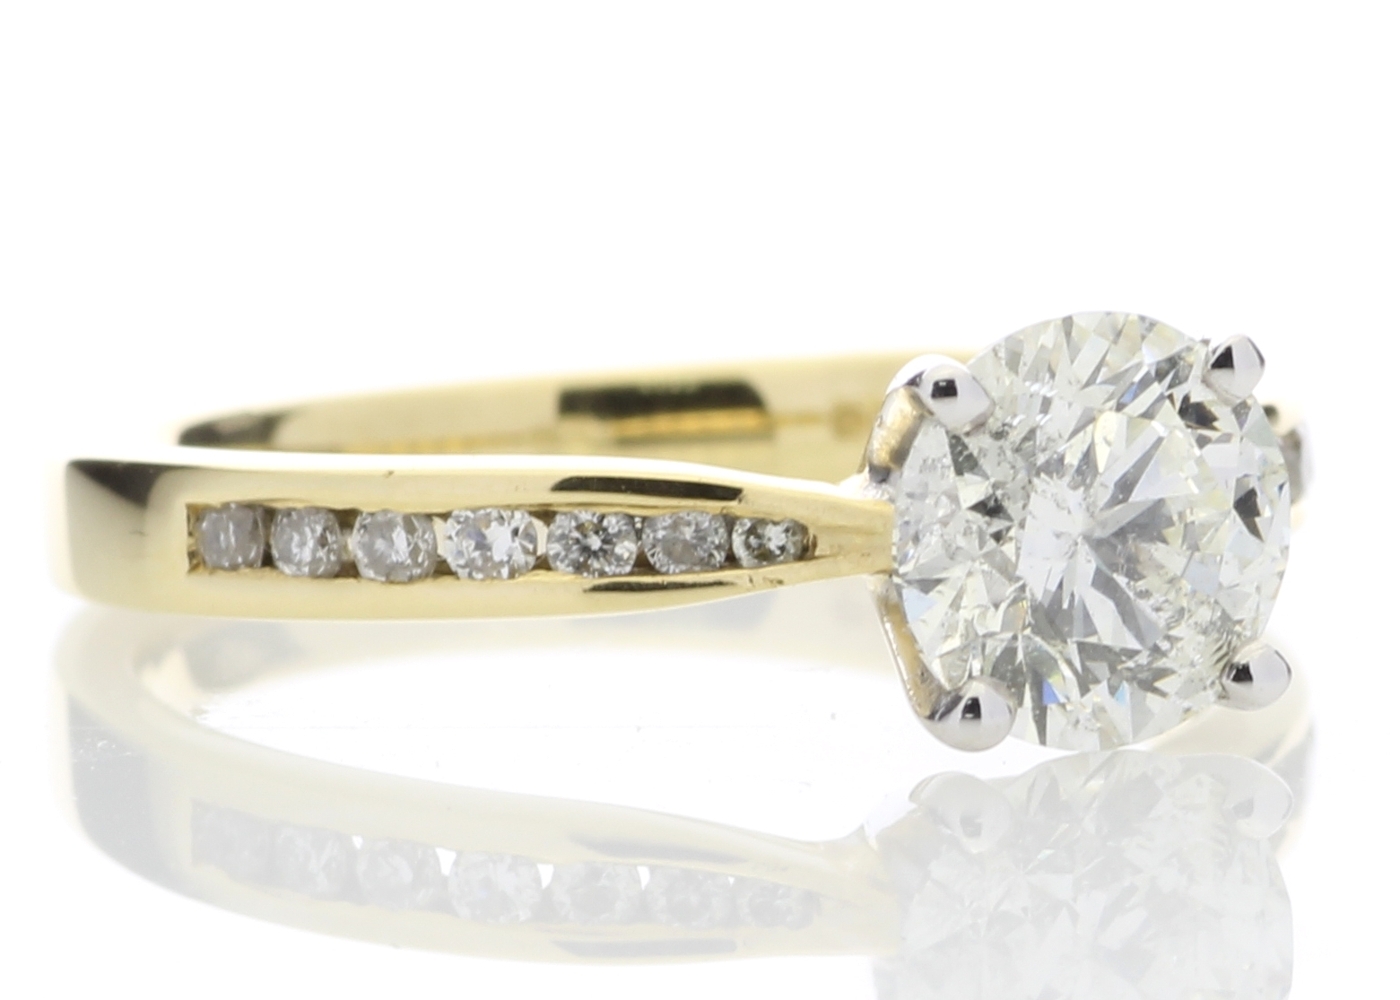 18ct Yellow Gold Single Stone Diamond Ring With Stone Set Shoulders (1.11) 1.28 Carats - Image 4 of 5